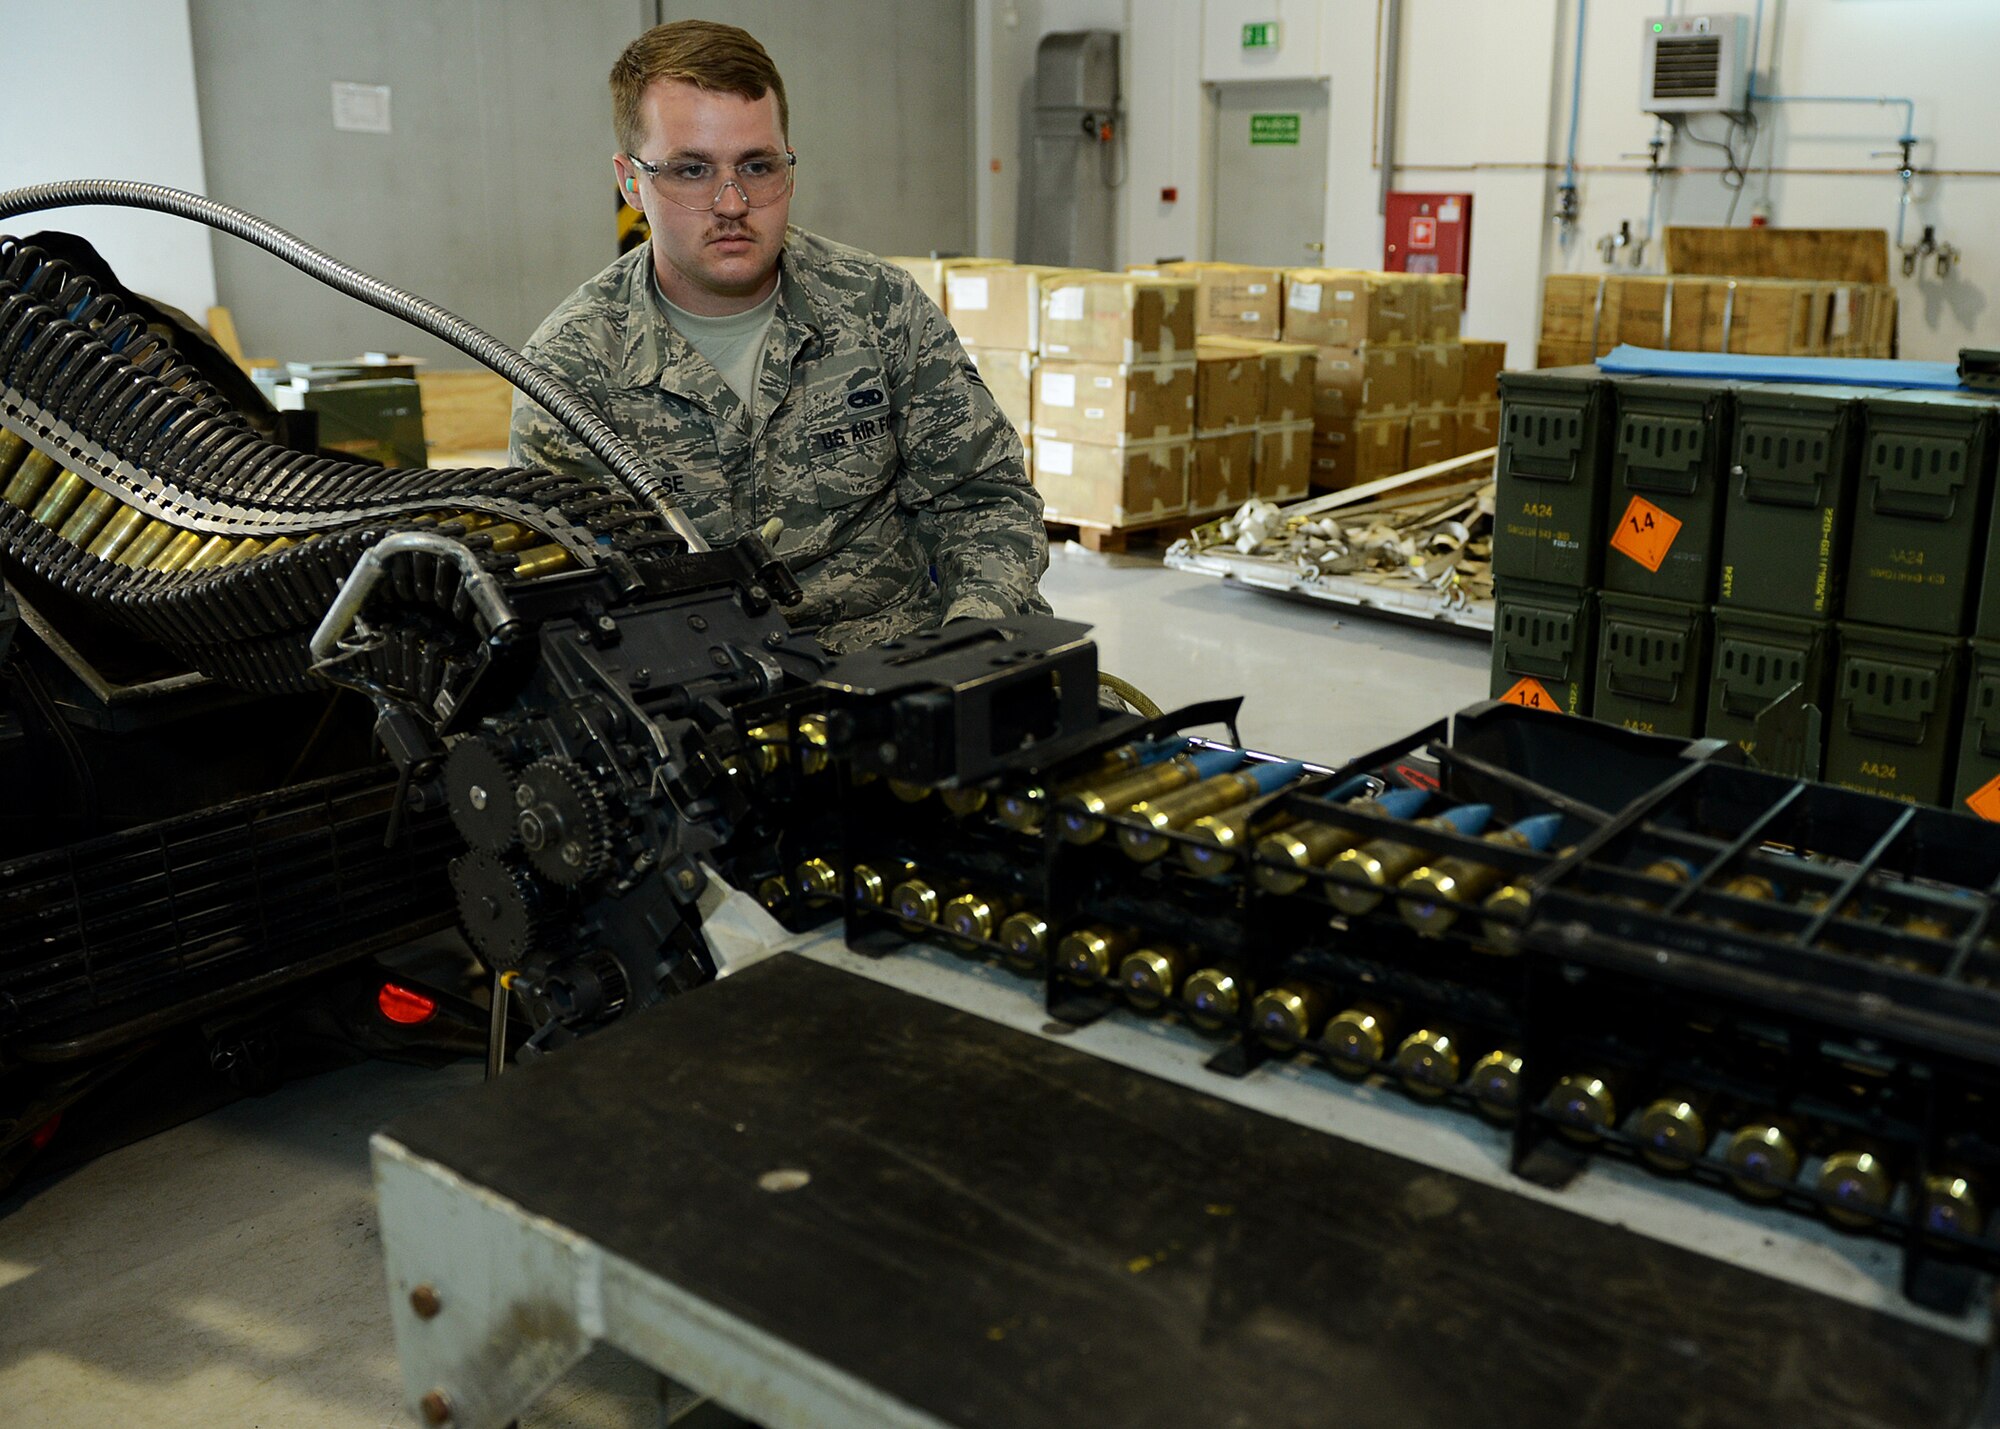 U.S. Air Force Airman 1st Class Joshua Hoose, 52nd Equipment Maintenance Squadron conventional maintenance crew member from Knoxville, Tenn., uses a replenisher table to load ammunition at Lask Air Base, Poland, June 12, 2014. Hoose loaded 20 mm target practice rounds to a universal ammunition loading system to support operations at the U.S. Aviation Detachment in Poland. The ammunition was used in exercises EAGLE TALON and BALTOPS 14, multinational theater security cooperation events in Eastern Europe. (U.S. Air Force photo by Airman 1st Class Kyle Gese/Released)